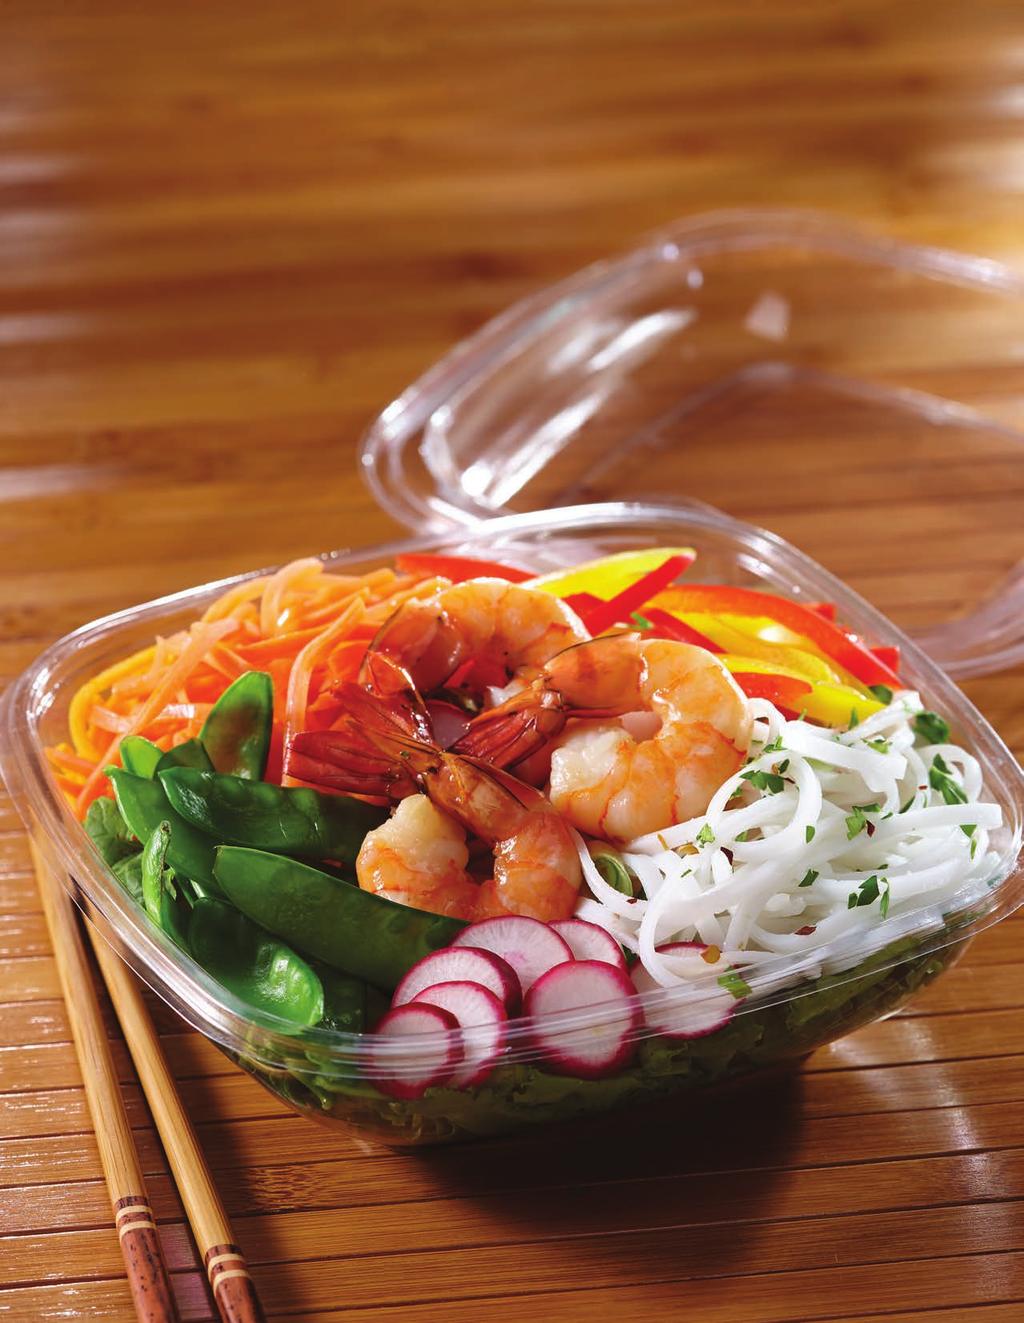 Designed and manufactured with quality in mind, these bowls feature clean lines, locking lids, tamper-resistant options and sturdy